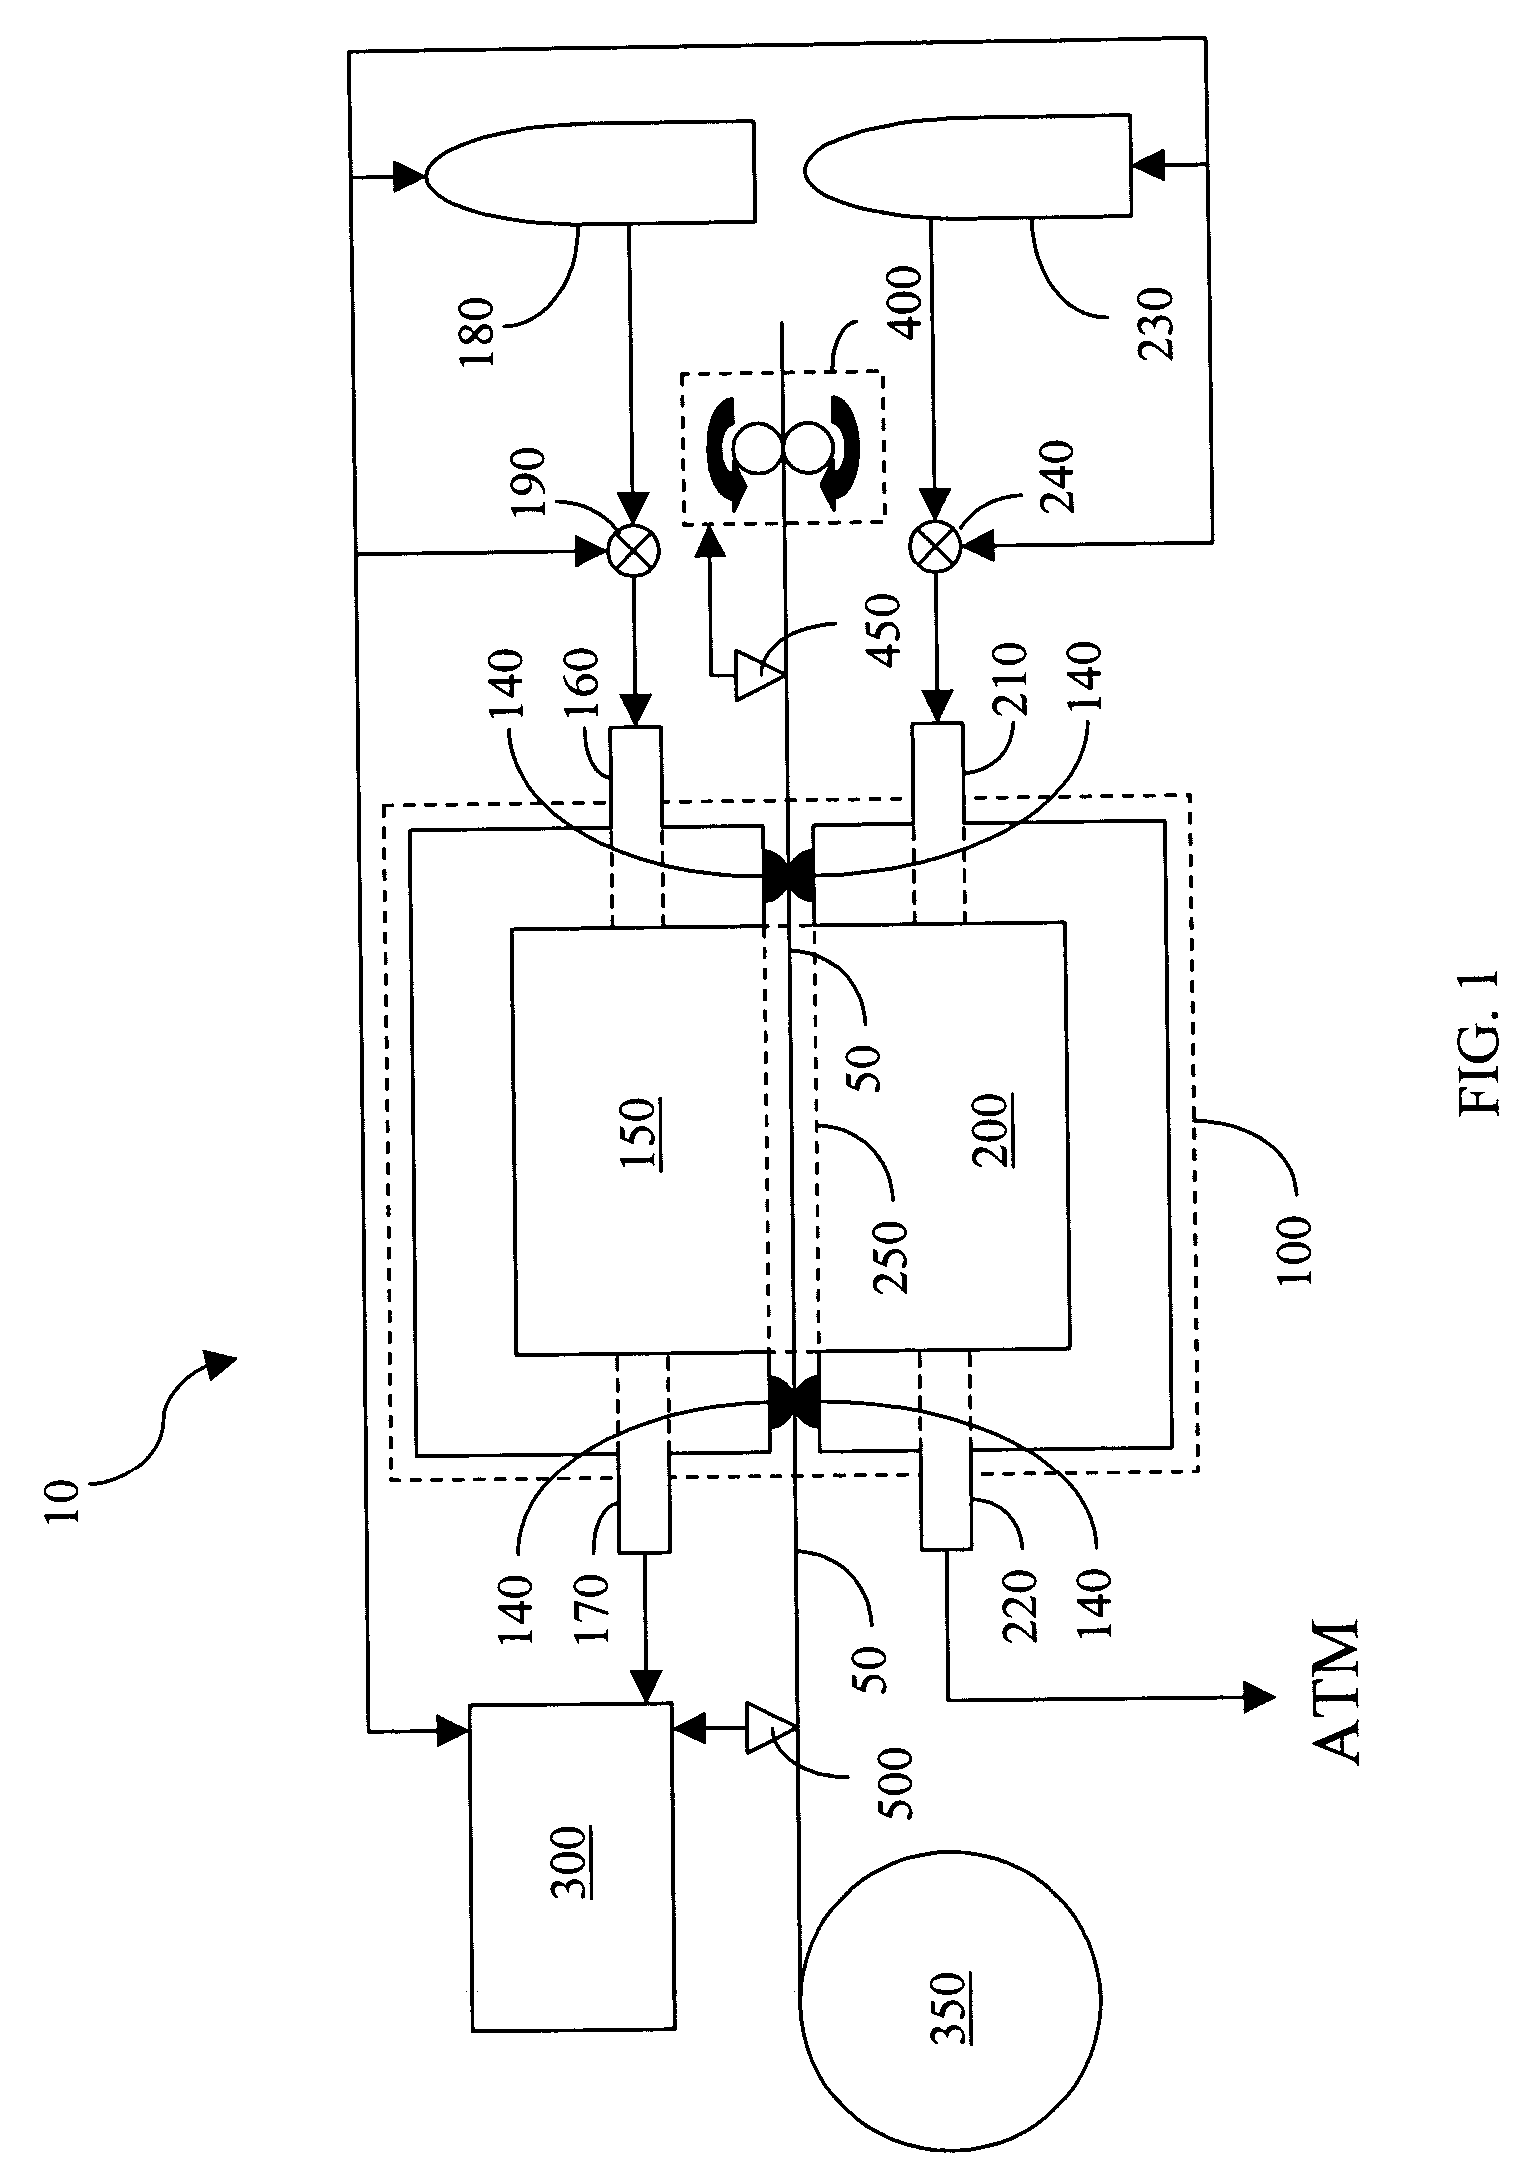 Apparatus for measuring a property of a cigarette paper wrapper and associated method